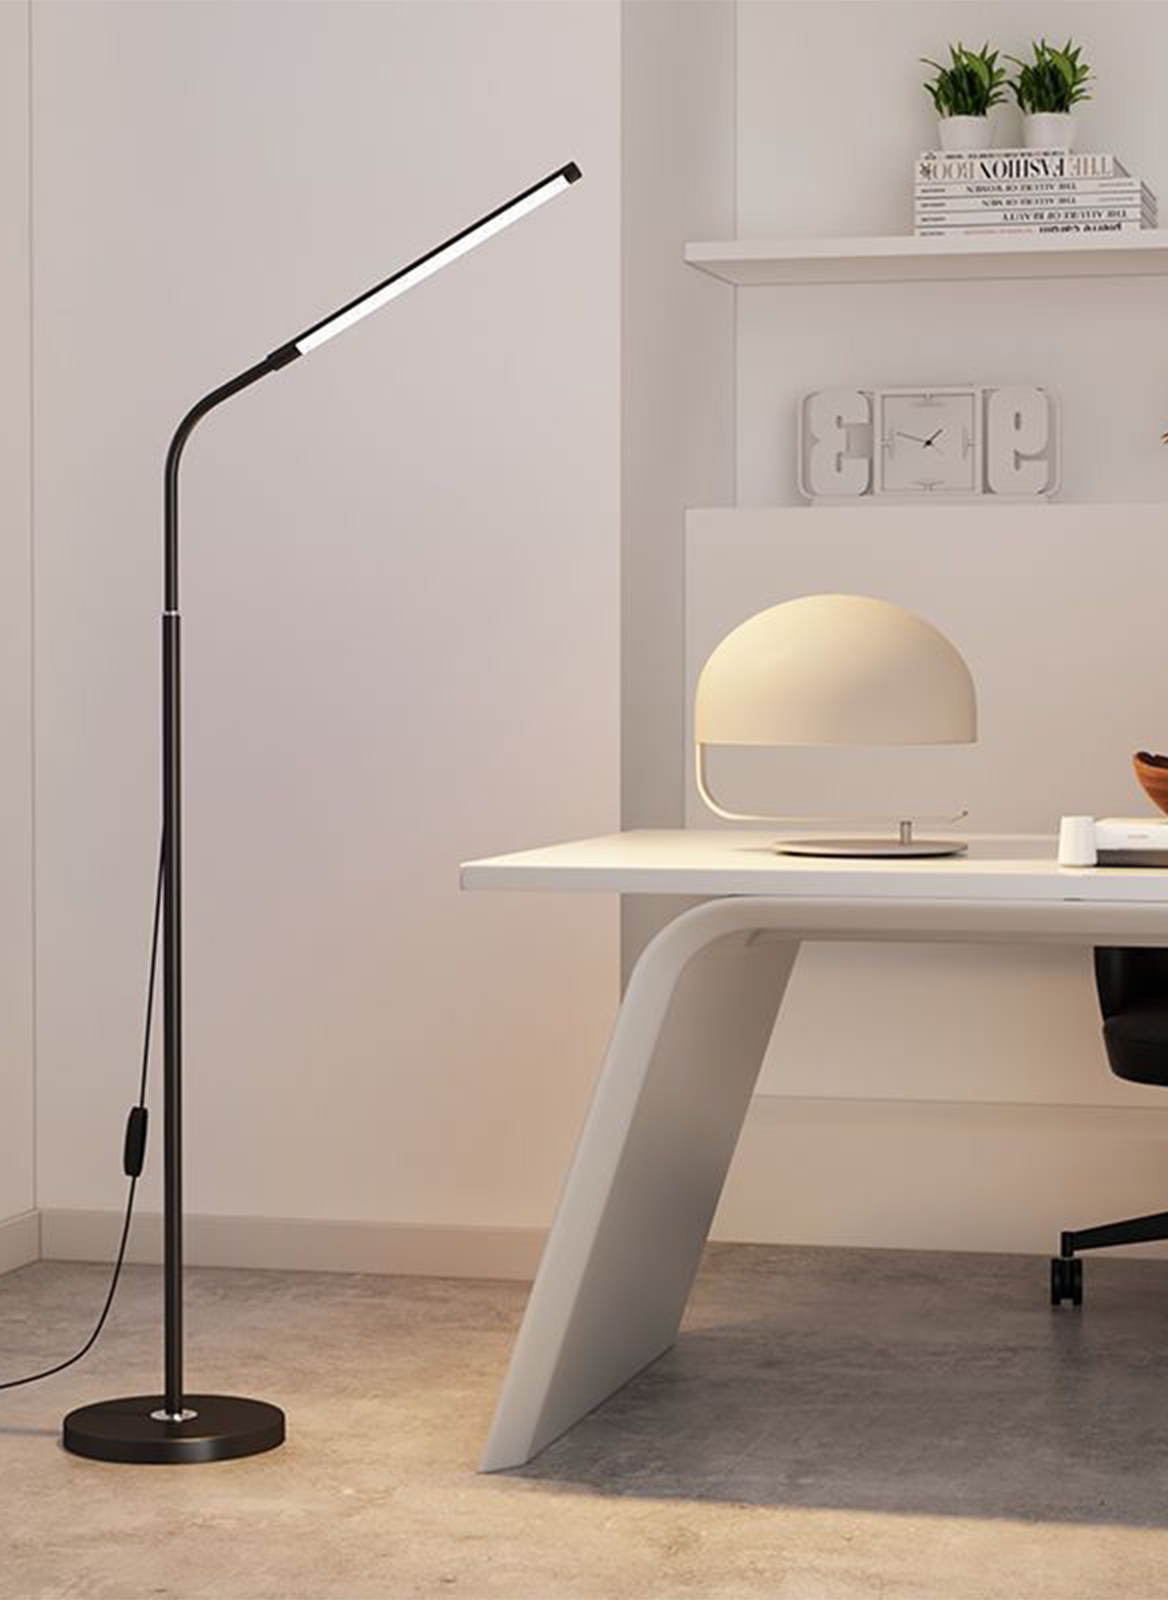 Bedroom Study USB/DC Vertical Floor Table Lamp Portable Lamp 12W, Dimmable and Color-Adjustable (UK)